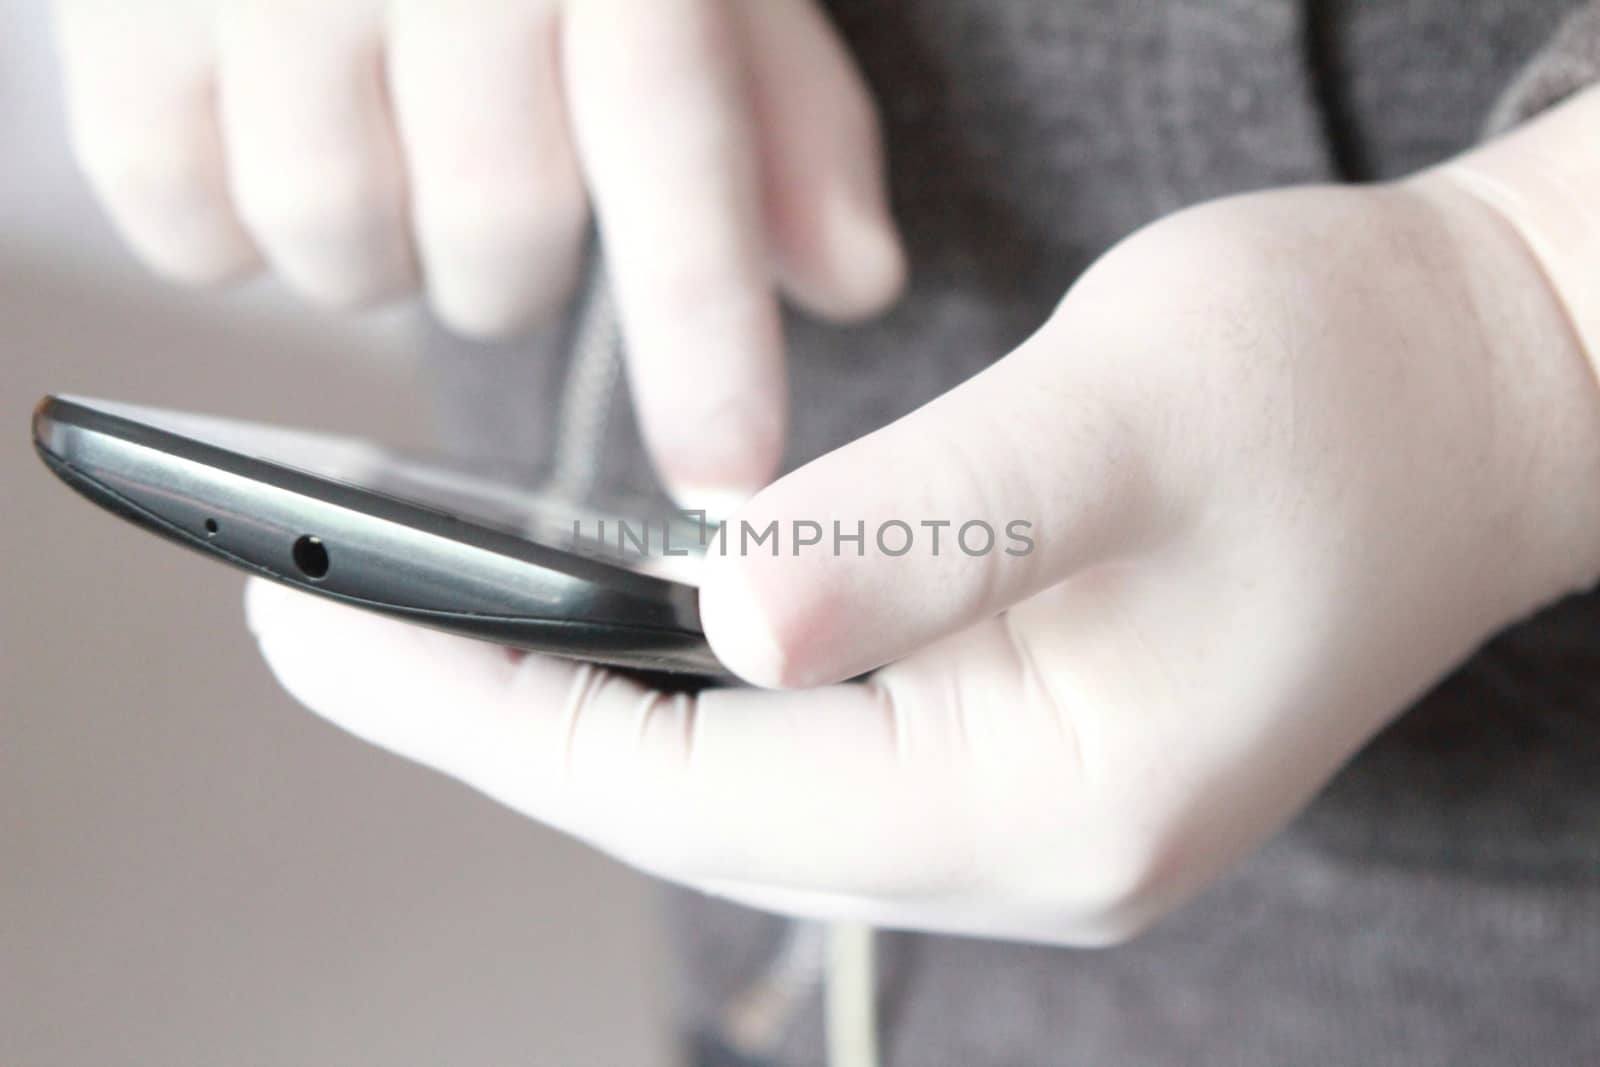 Hands in white latex surgical gloves holding a mobile phone